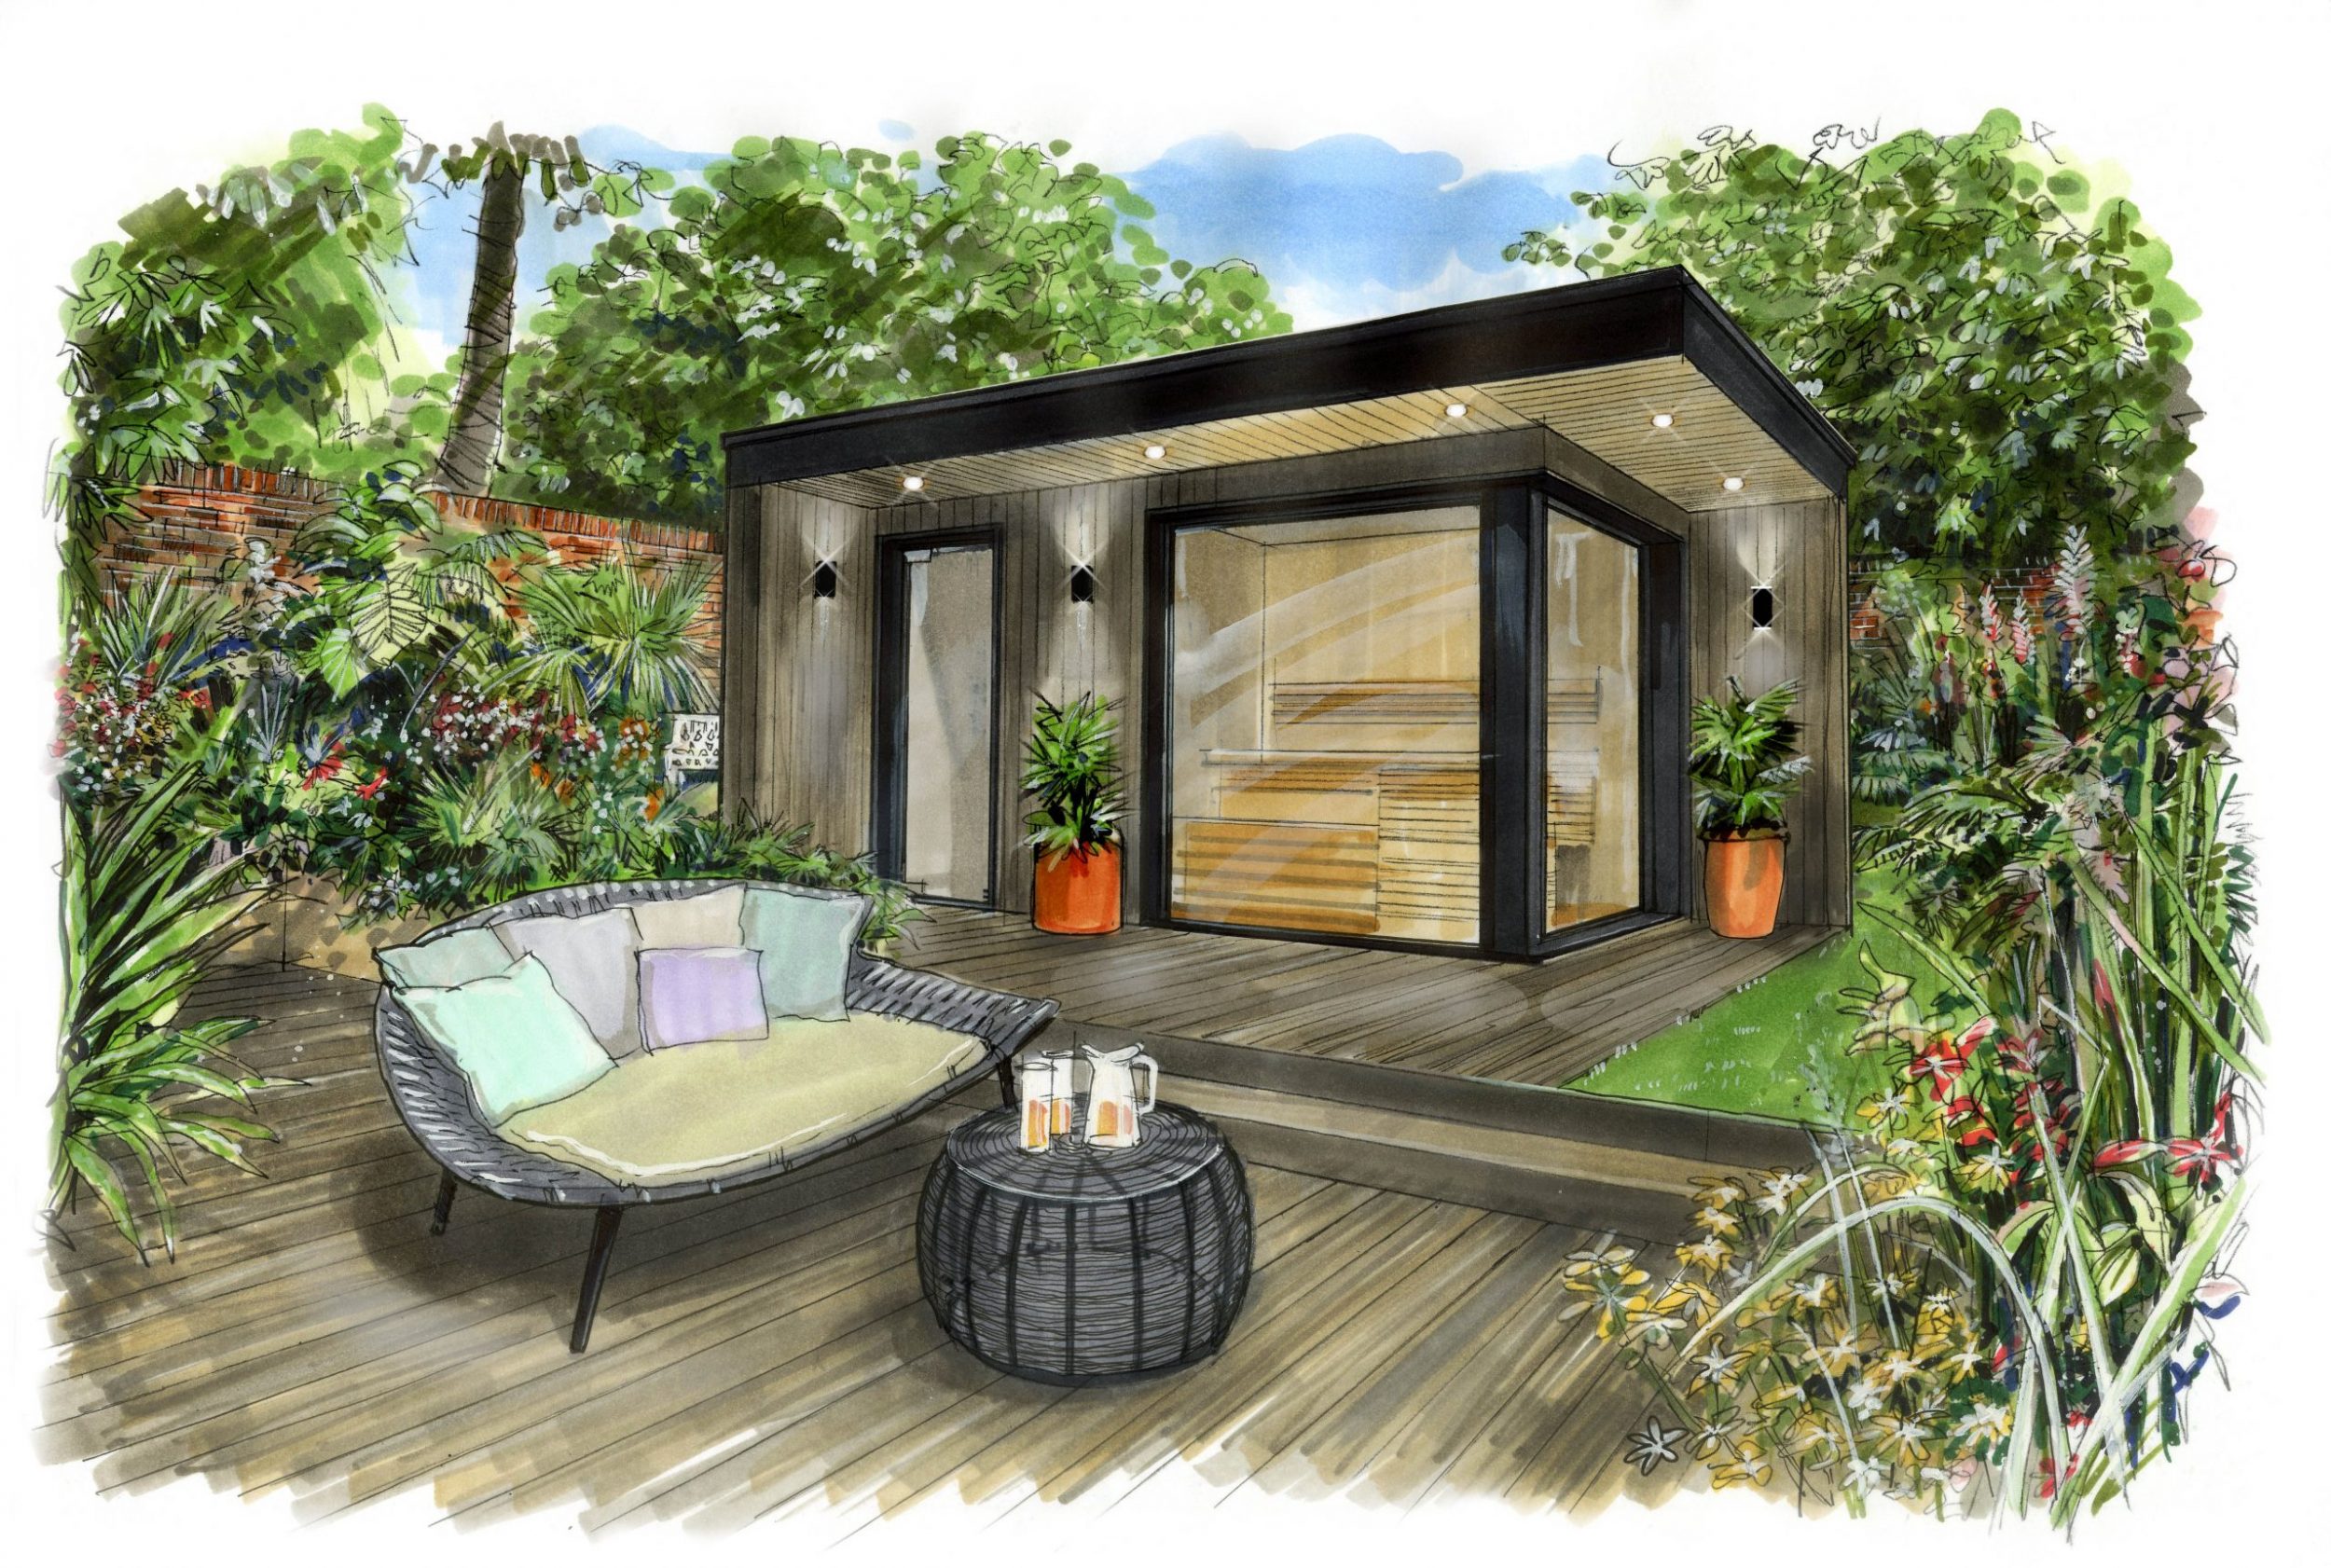 Drawing of a garden room with sofa outside